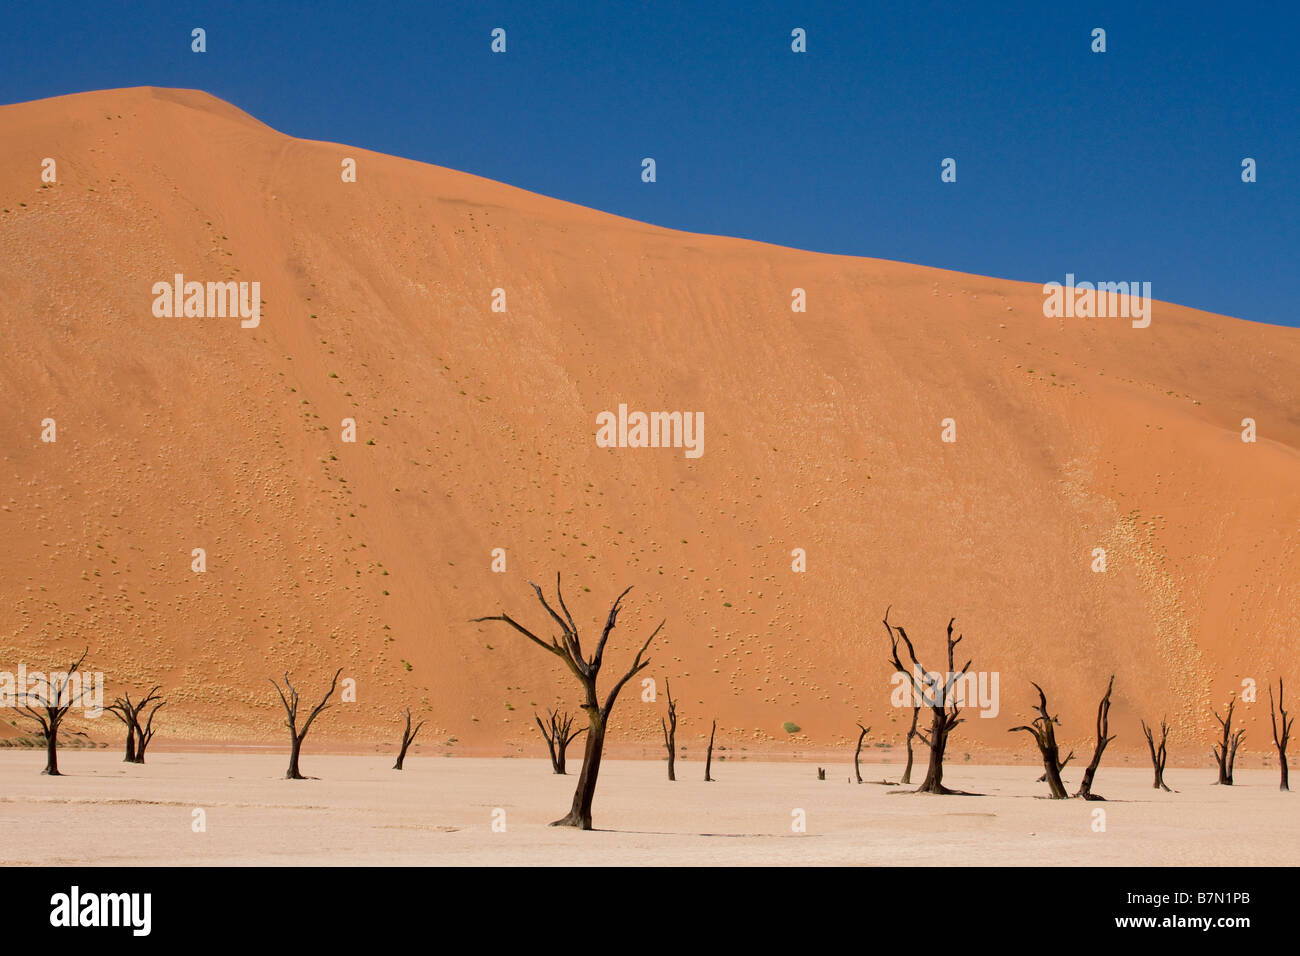 Dessicated Trees, A Mirage and Red Dunes at Dead Vlei, Sossusvlei, Namibia Stock Photo